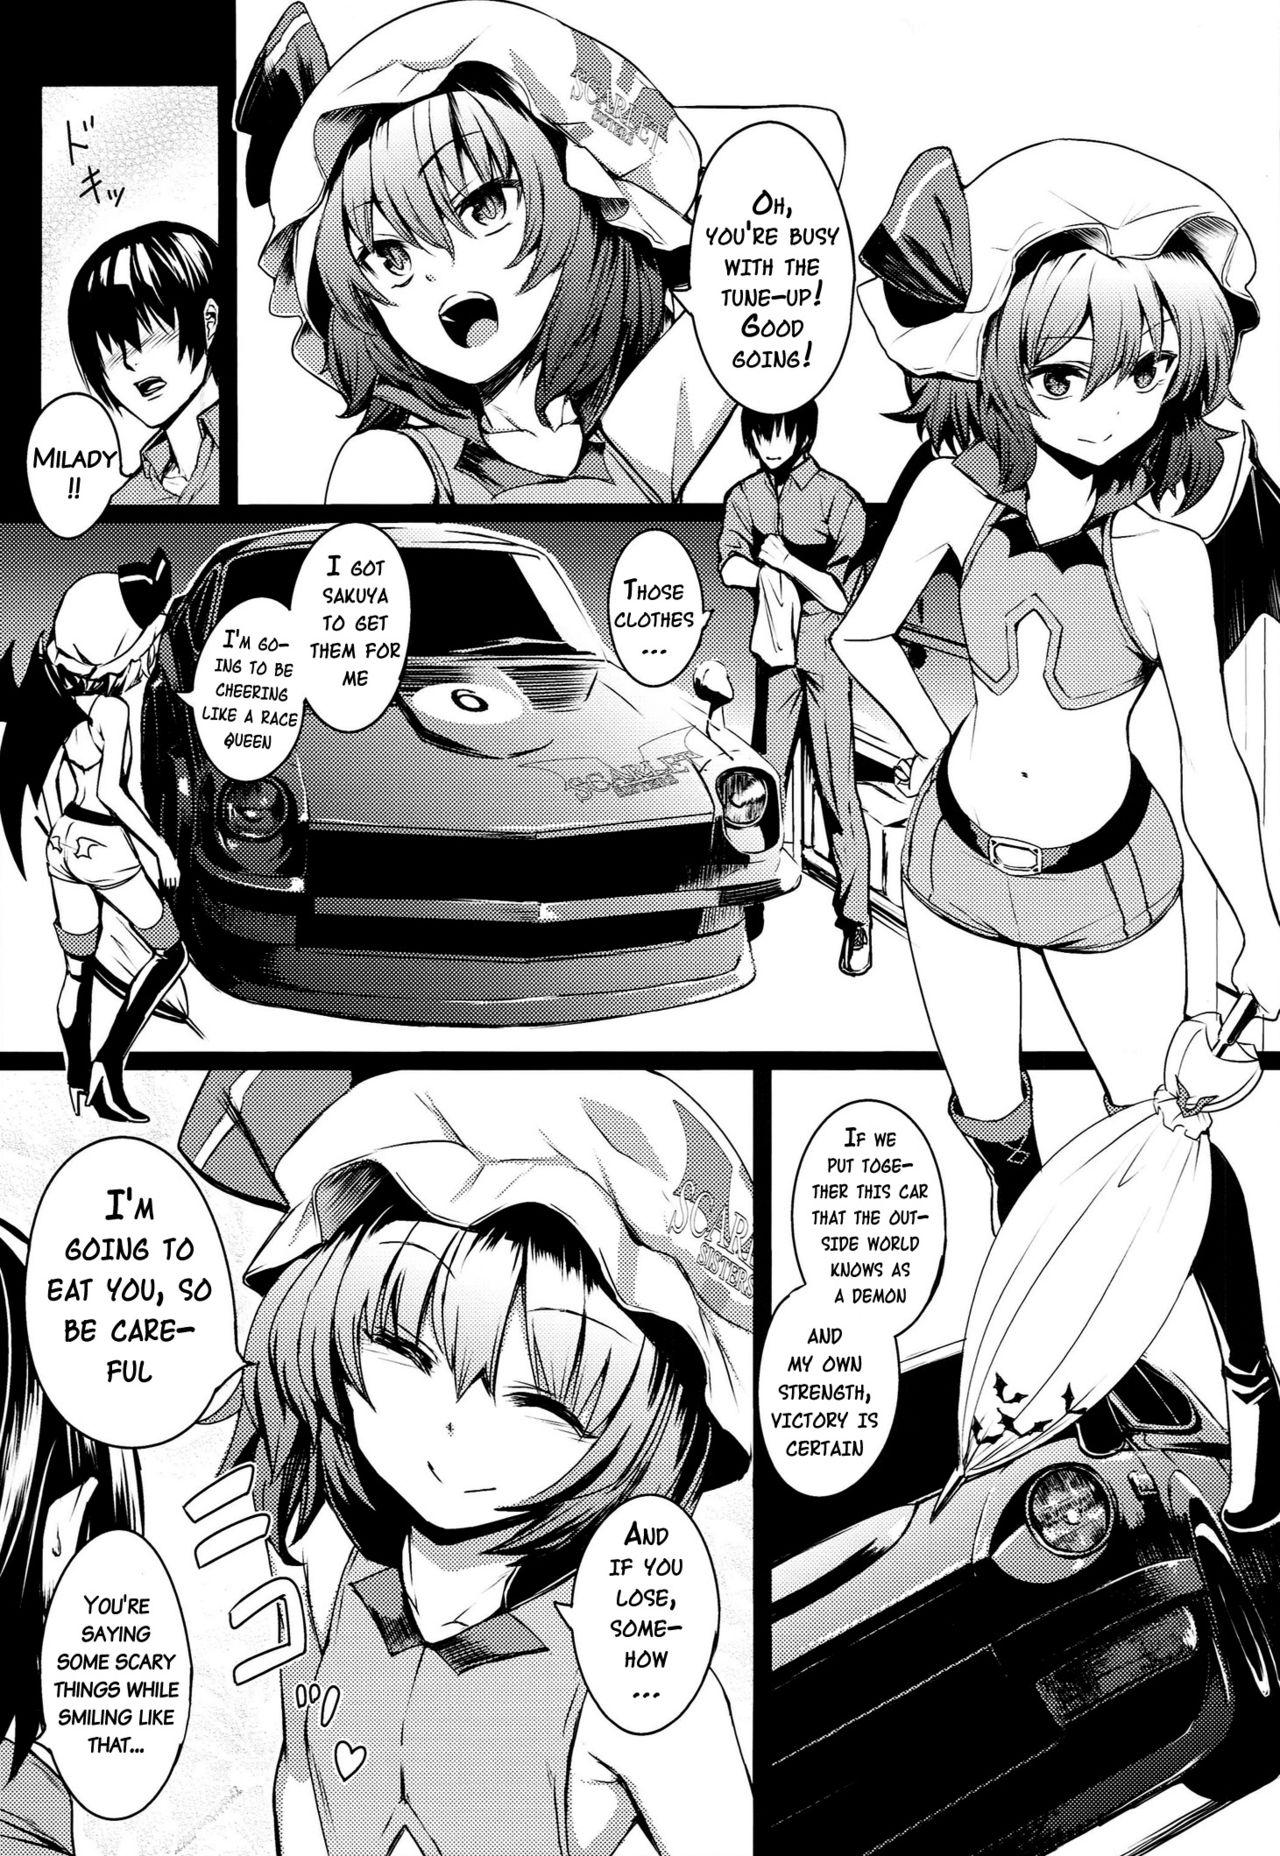 Sex TOUHOU RACE QUEENS COLLABO CLUB - Touhou project Worship - Page 4